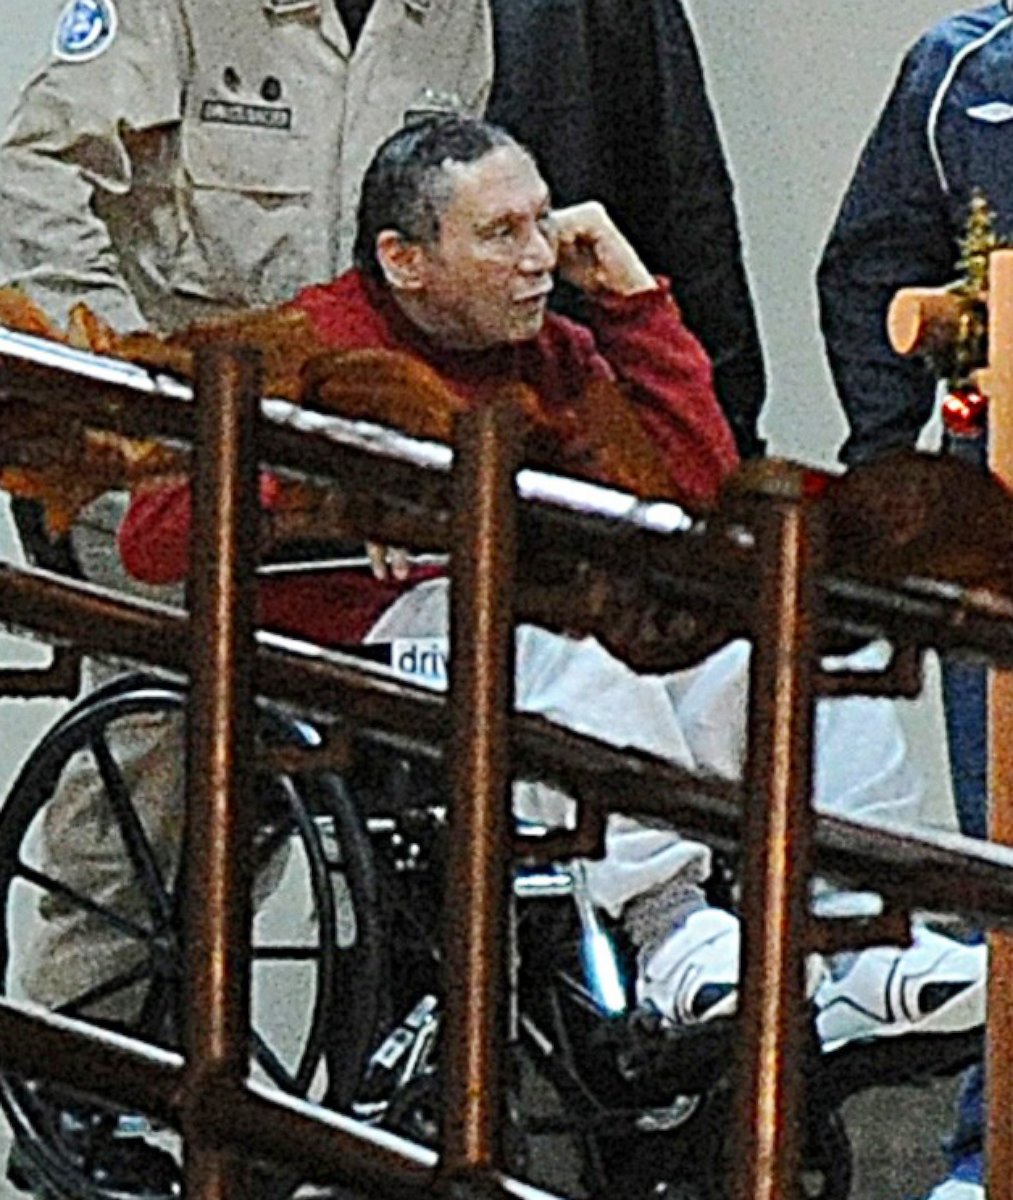 PHOTO: Former Panamenian dictator Manuel Noriega, 77, is seen arriving at the Renacer Prison, outside of Panama City, after more than two decades in prisons in the United States and France, Dec. 11, 2011.  